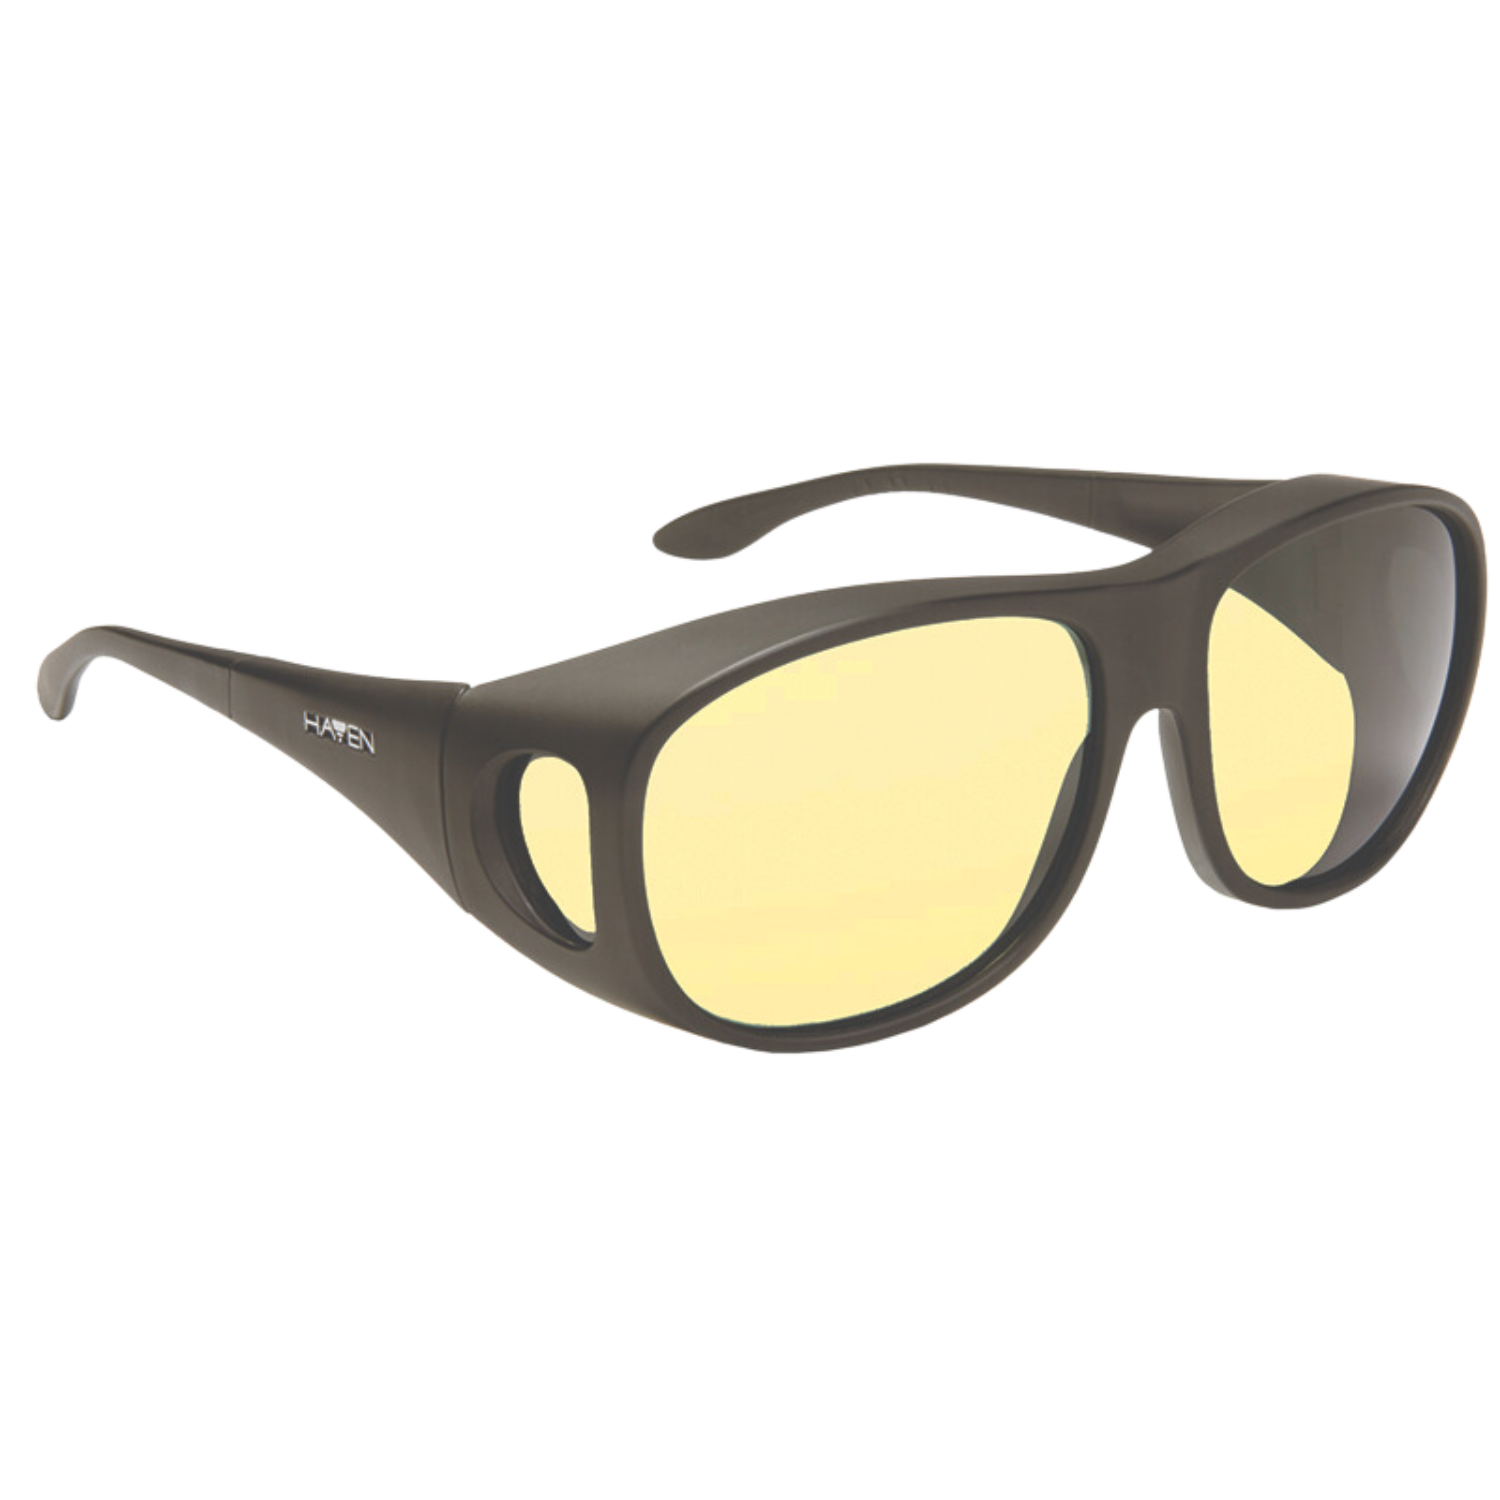 Image of the Haven Night Driving glasses with light yellow tint from Eschenbach.